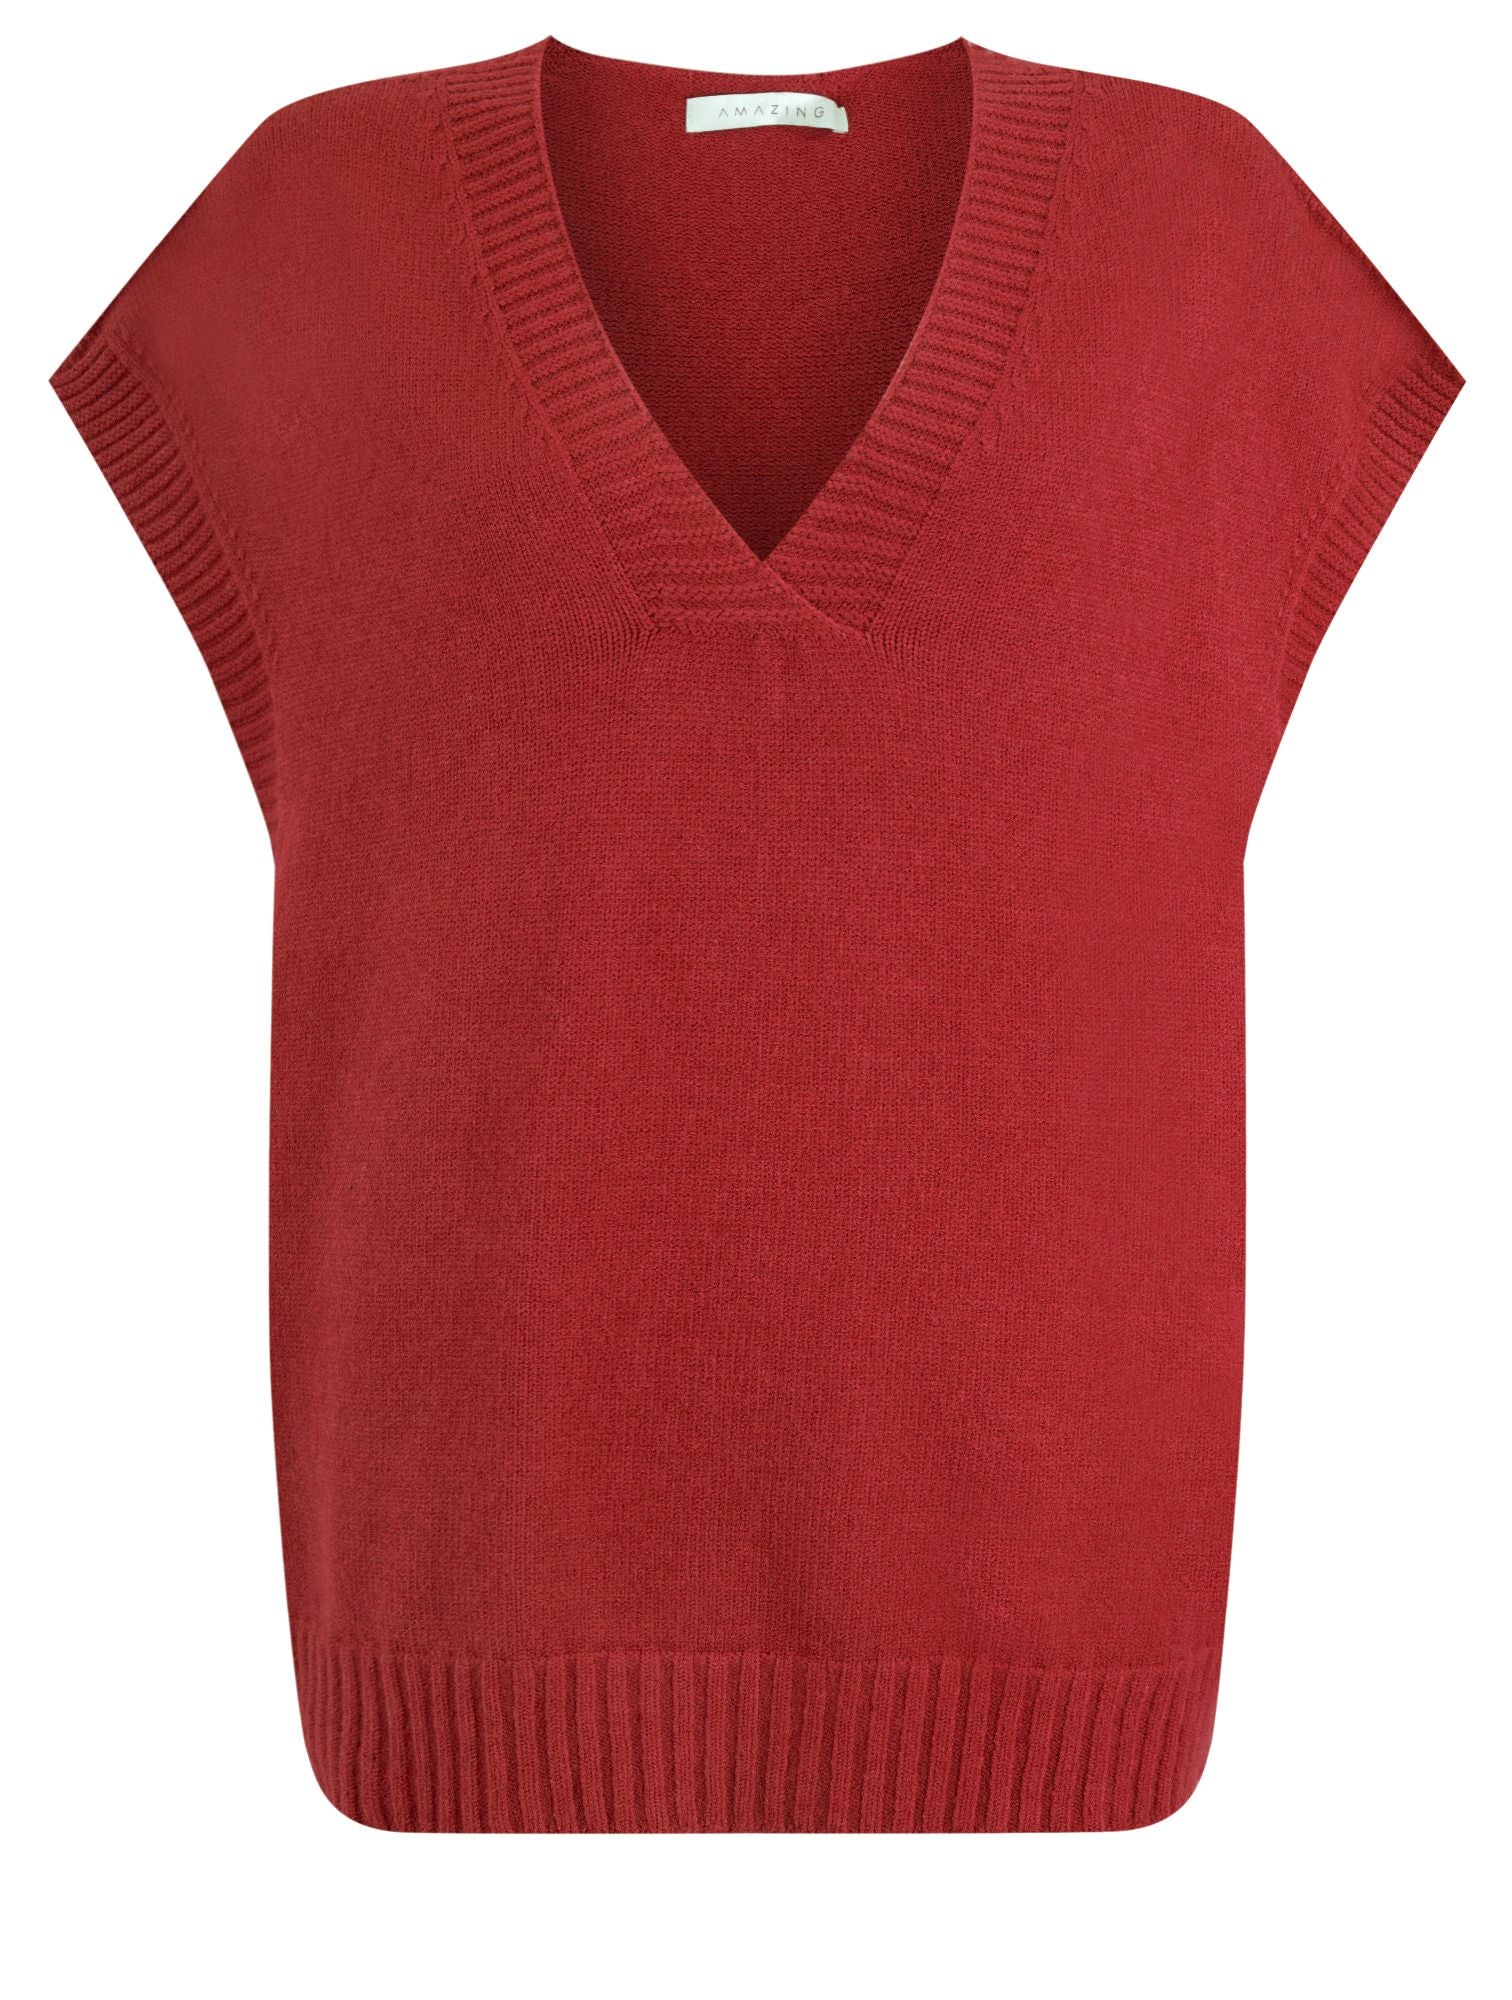 Brightly coloured one size knitwear 